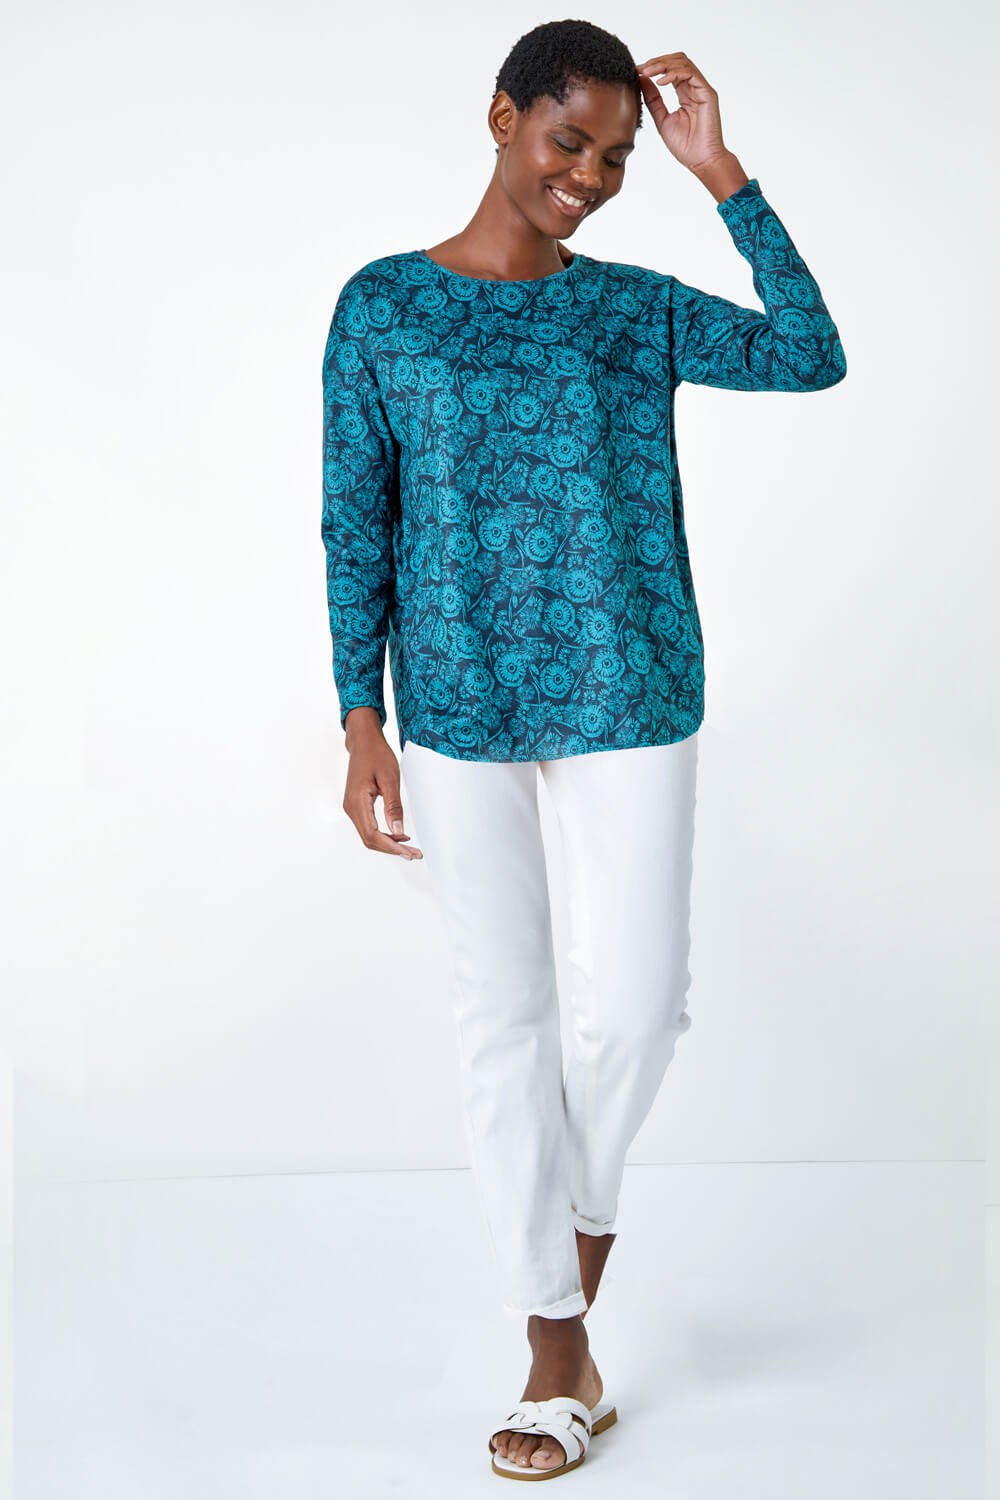 Teal Floral Soft Stretch Jersey Top, Image 2 of 5